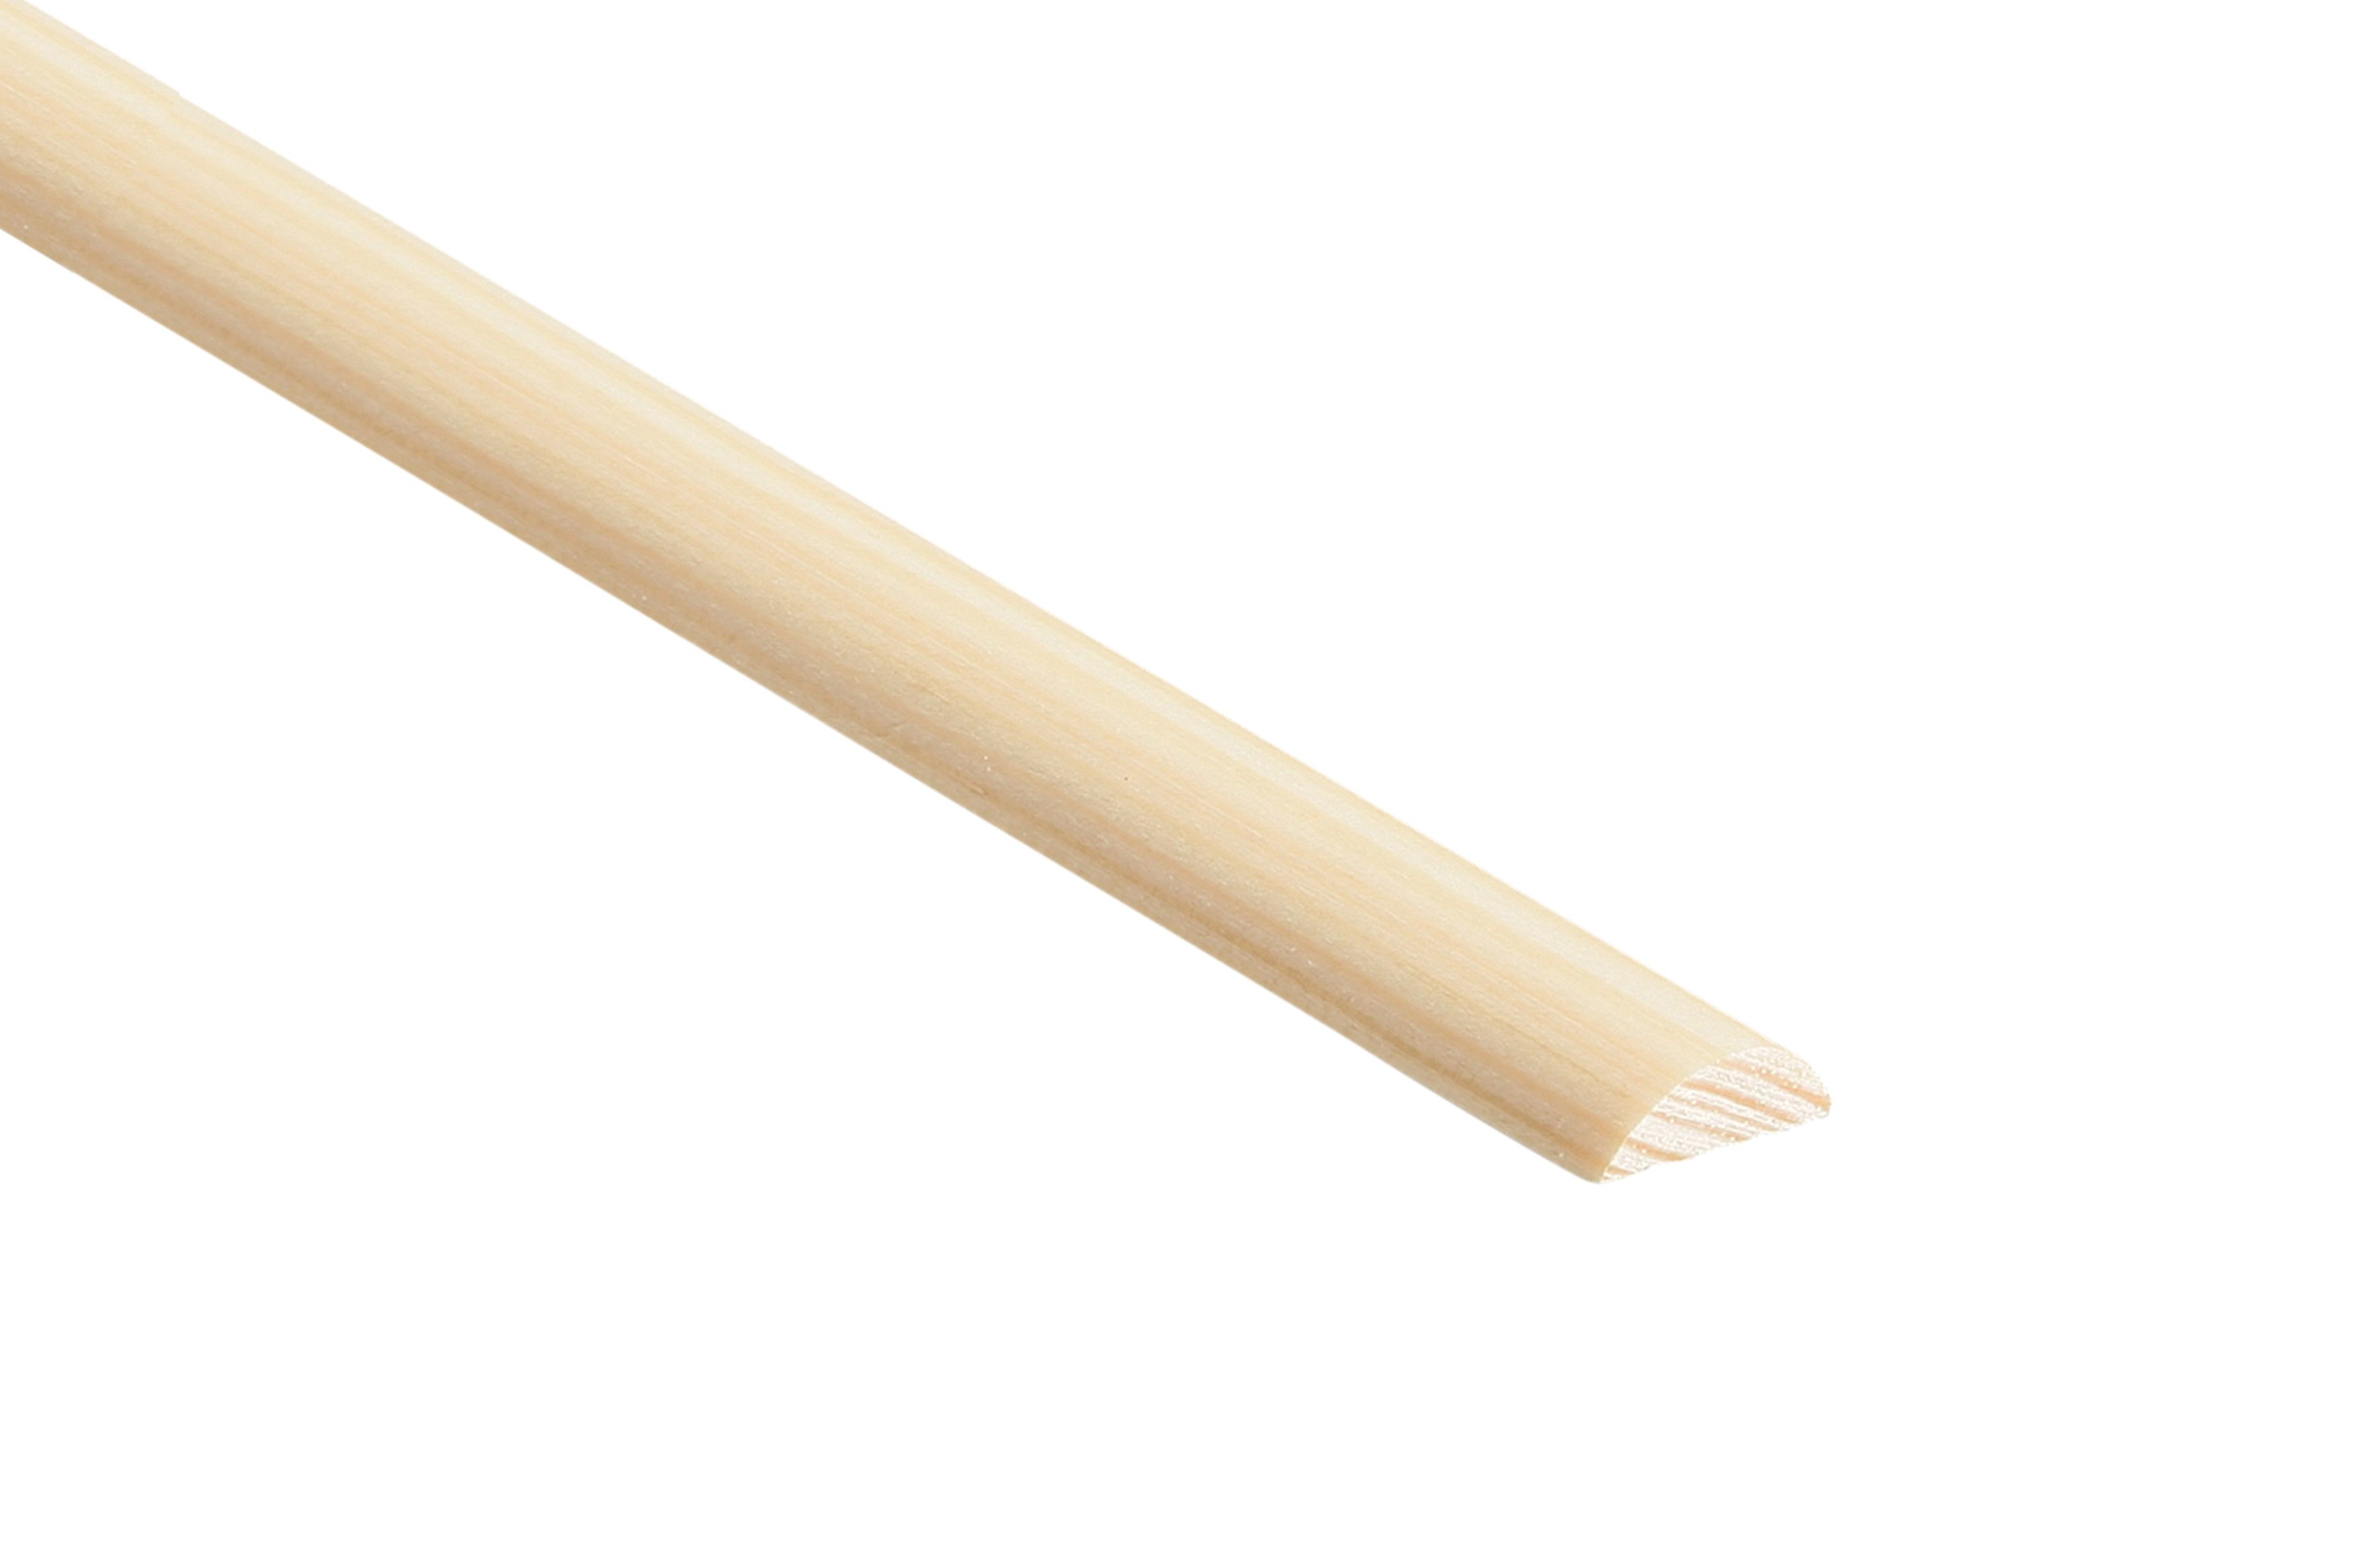 Image of Wickes Pine Half Round Moulding - 18 x 8 x 2400mm